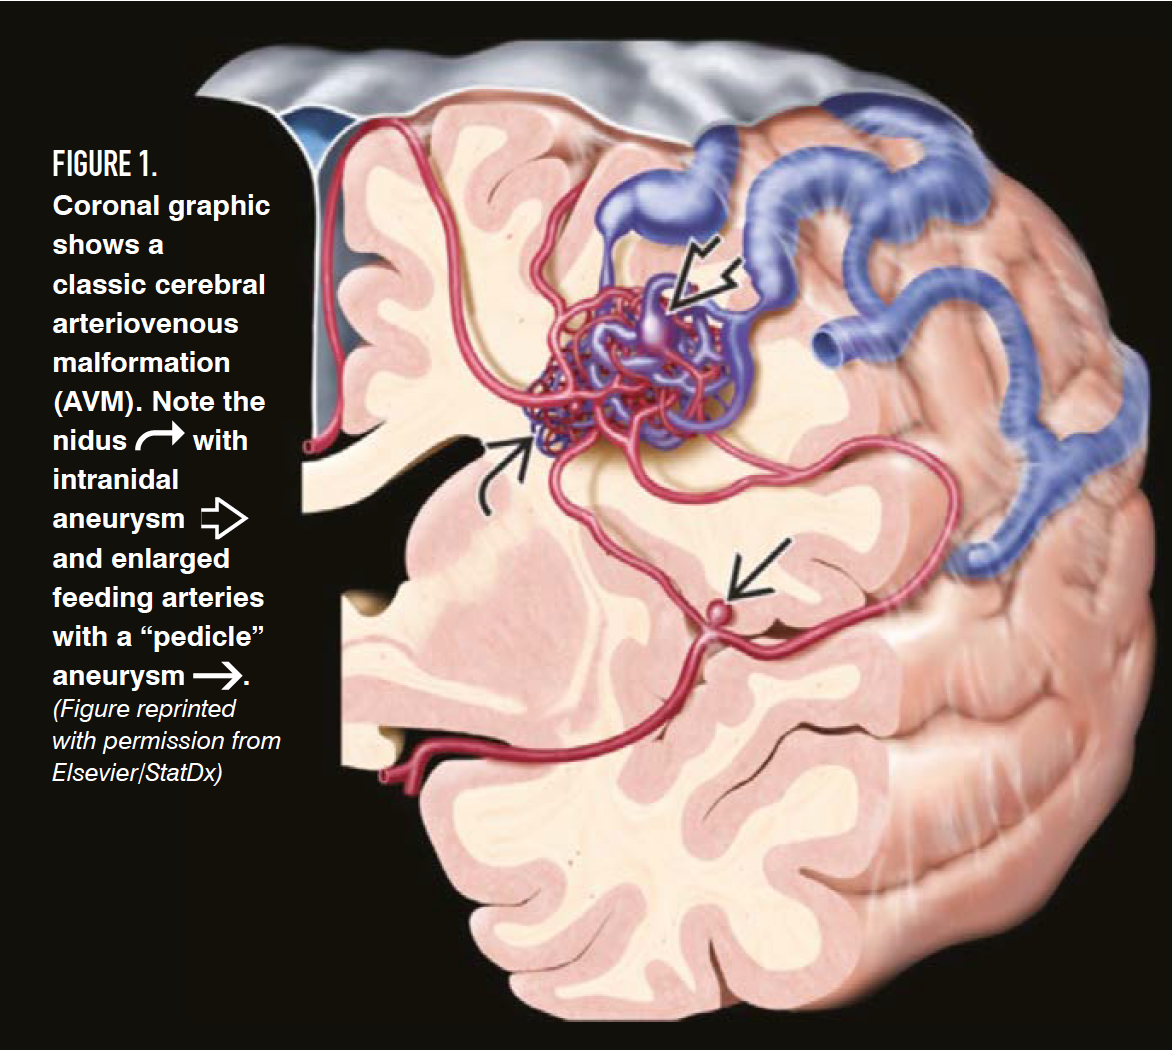 Figure 1.

Coronal graphic shows a classic cerebral arteriovenous malformation (AVM). Note the nidus with intranidal aneurysm and enlarged feeding arteries with a “pedicle” aneurysm .

(Figure reprinted with permission from Elsevier/StatDx)